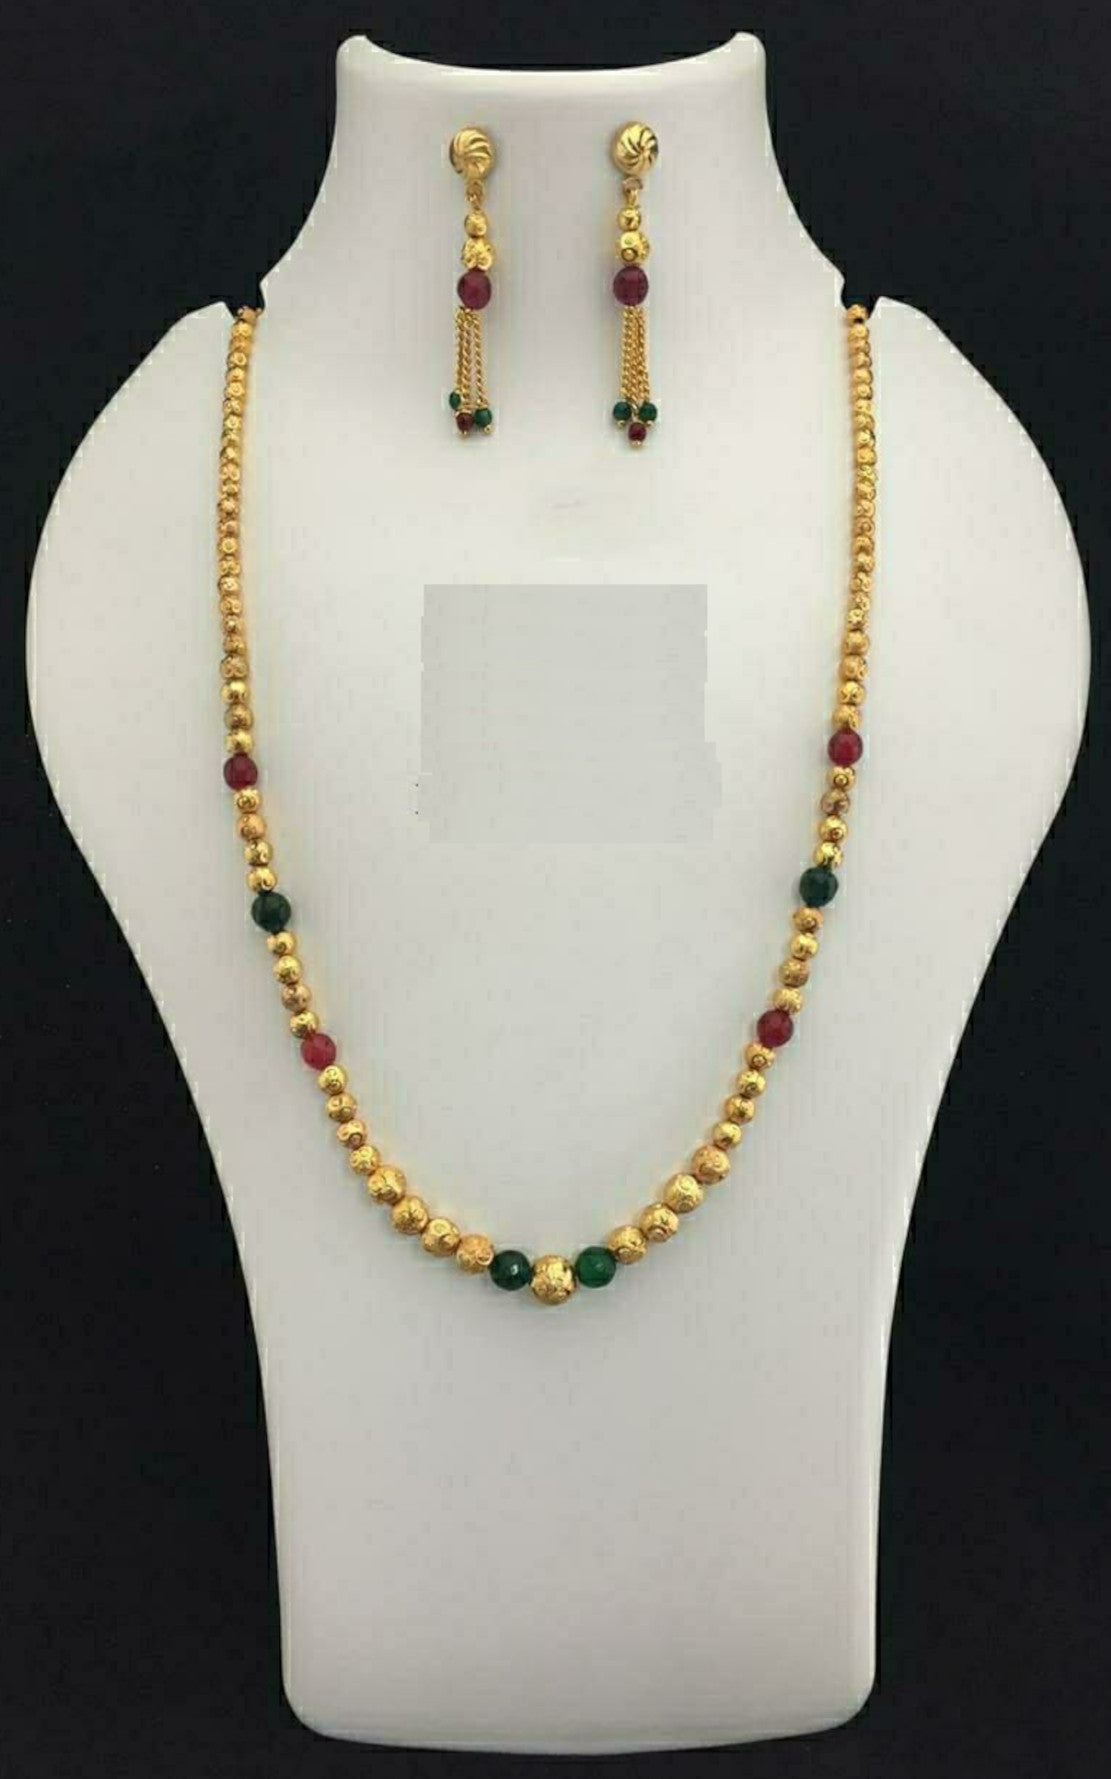 Gold Plated Necklace Chain with Earrings